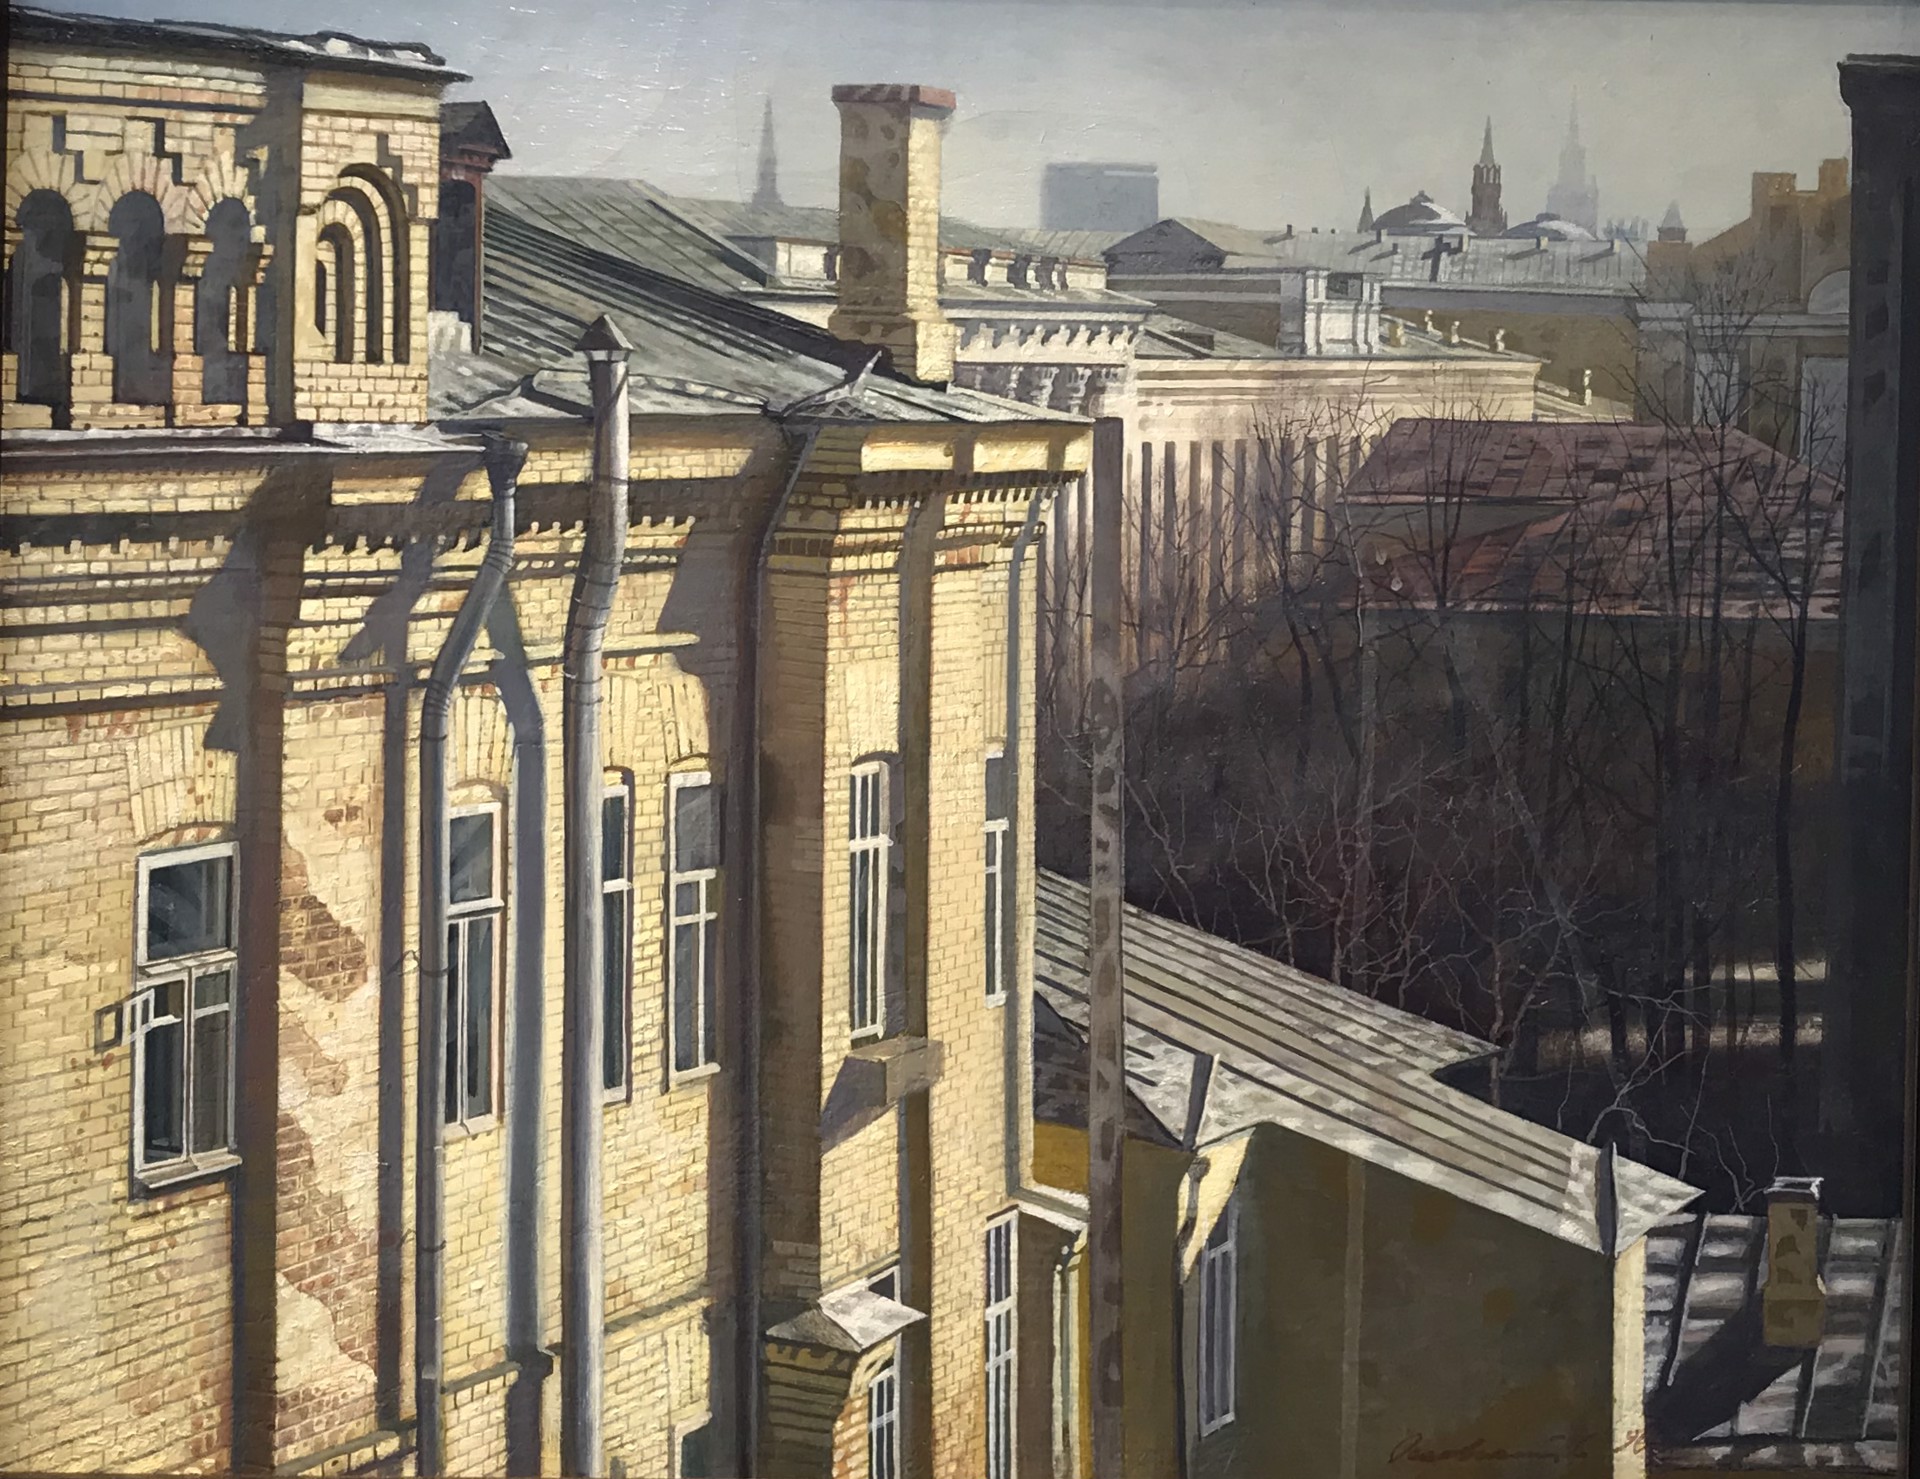 Spring in the City by Sergei Ossovsky